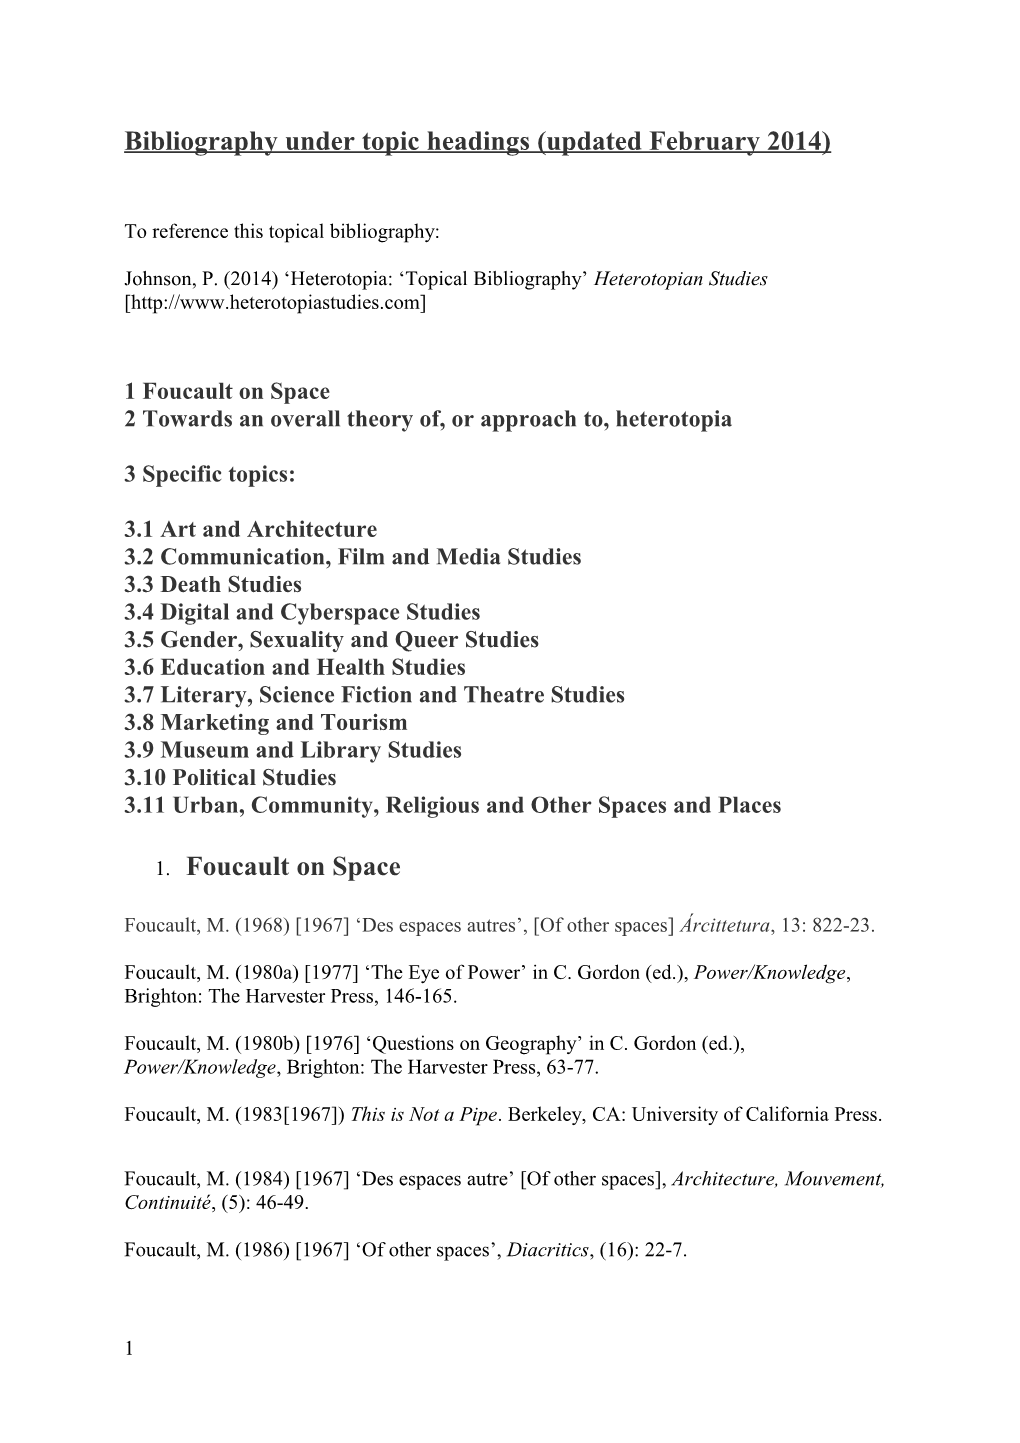 Bibliography Under Topic Headings (Updated February 2014)